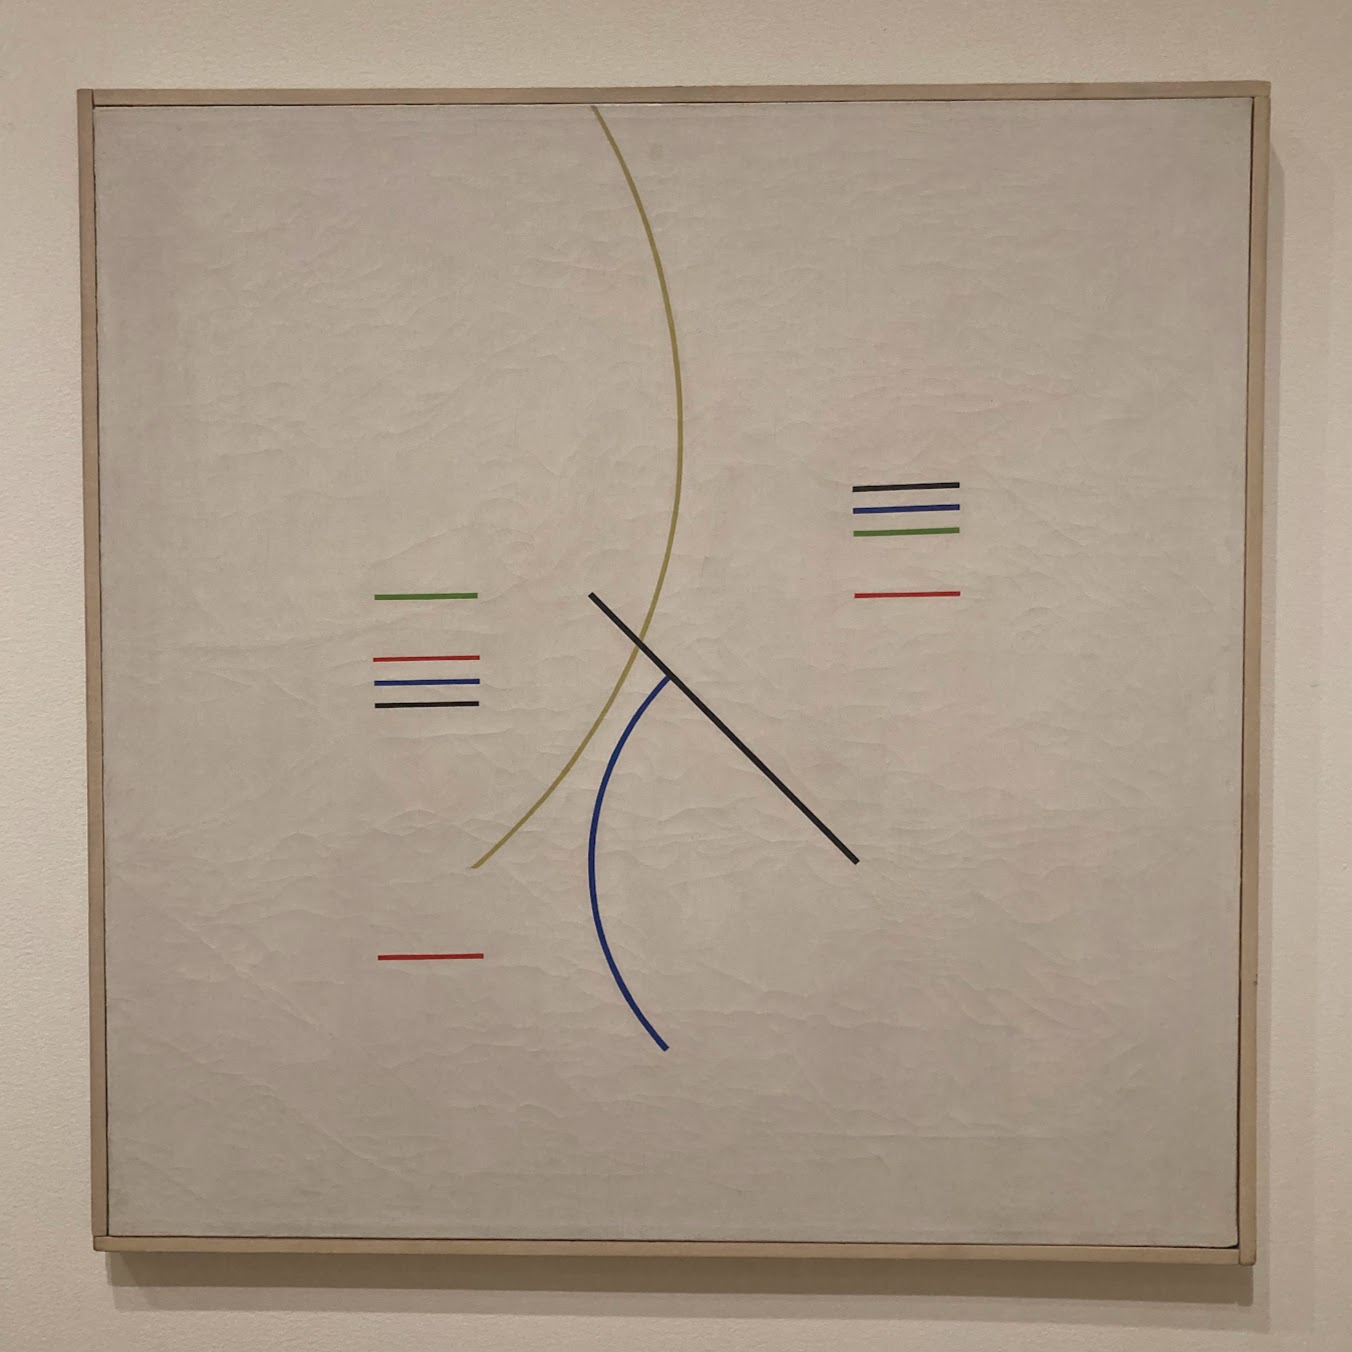 An oil painting of colorful geometric lines on a cream background. Starting at the top of the painting in the middle there is a dark yellow curve. Intersecting it in the center of the painting is a black line at a 45 degree angle and a dark blue curve. In the top right of the center area there are short horizontal black blue green and red lines. In the top left of the center area are horizontal green red blue and black lines. In the bottom left of the center there is a short horizontal red line. To us, the placement of these lines conveys a sense of balance and free movement. This in the spirit of Hlito's placement in art history, as one who rejected figurativism  and celebrated abstraction and geometry.